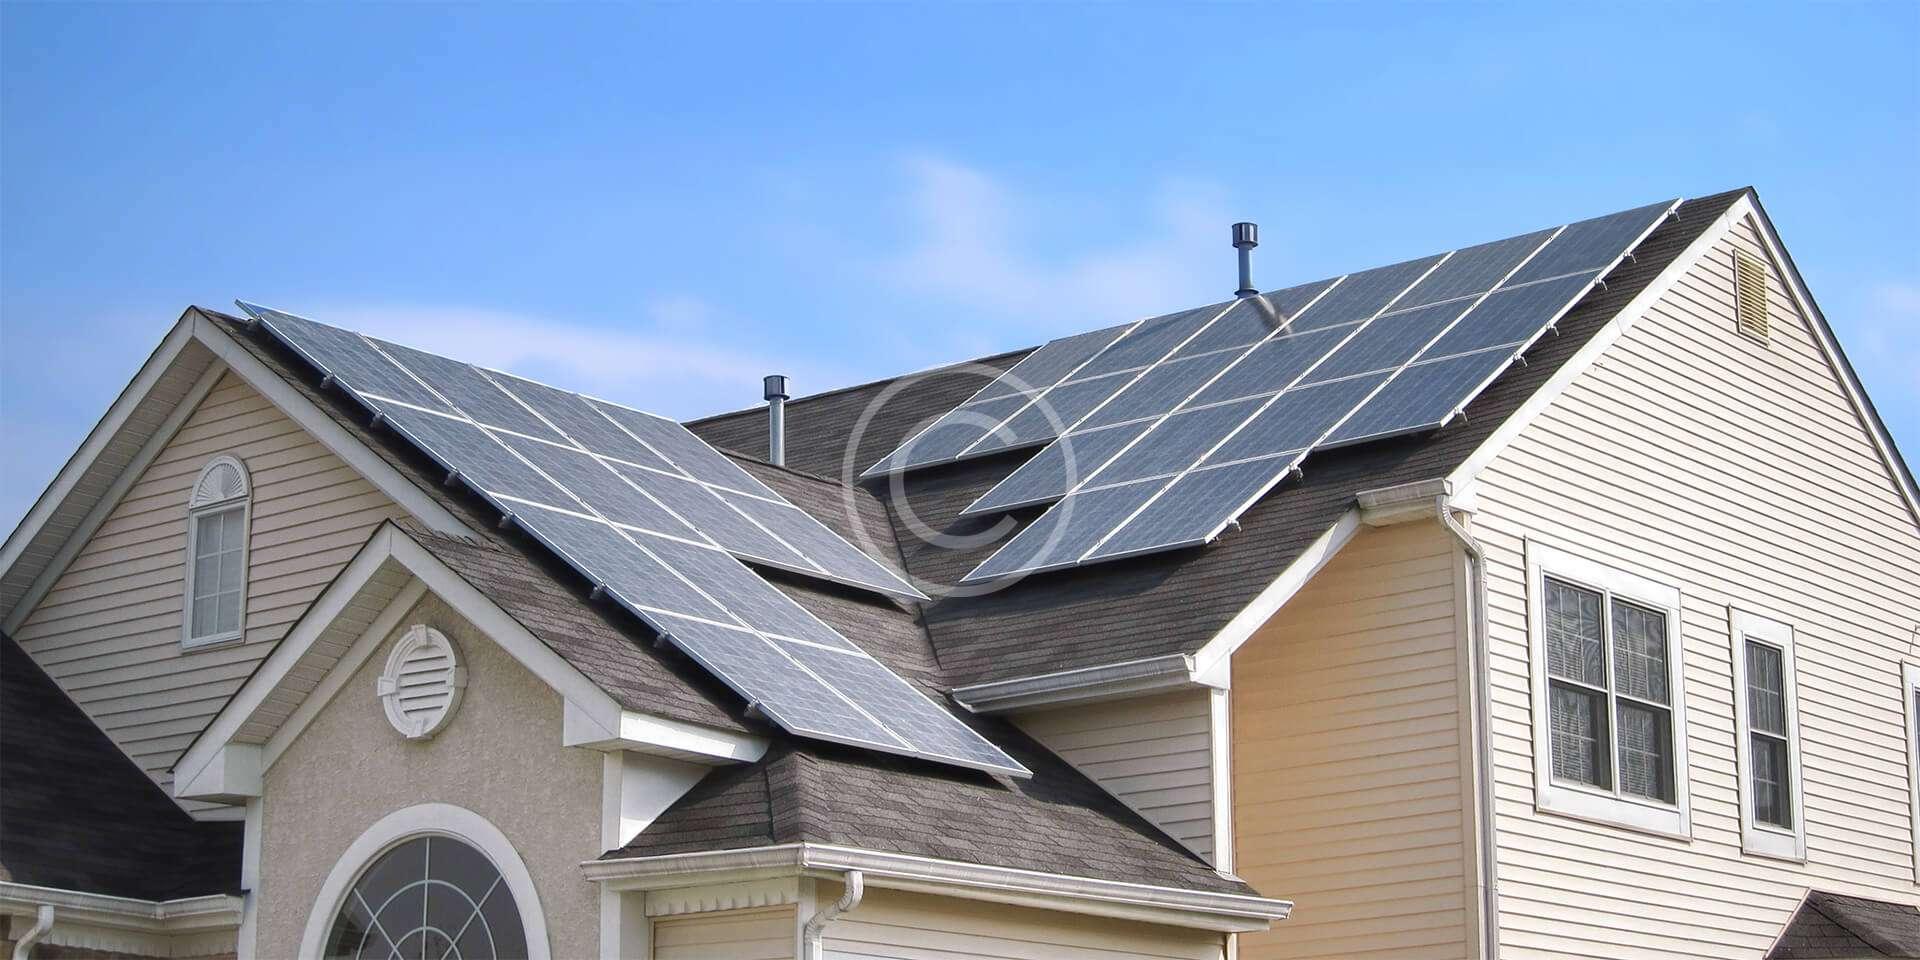 Product Home solar panels - Stomana Industry image